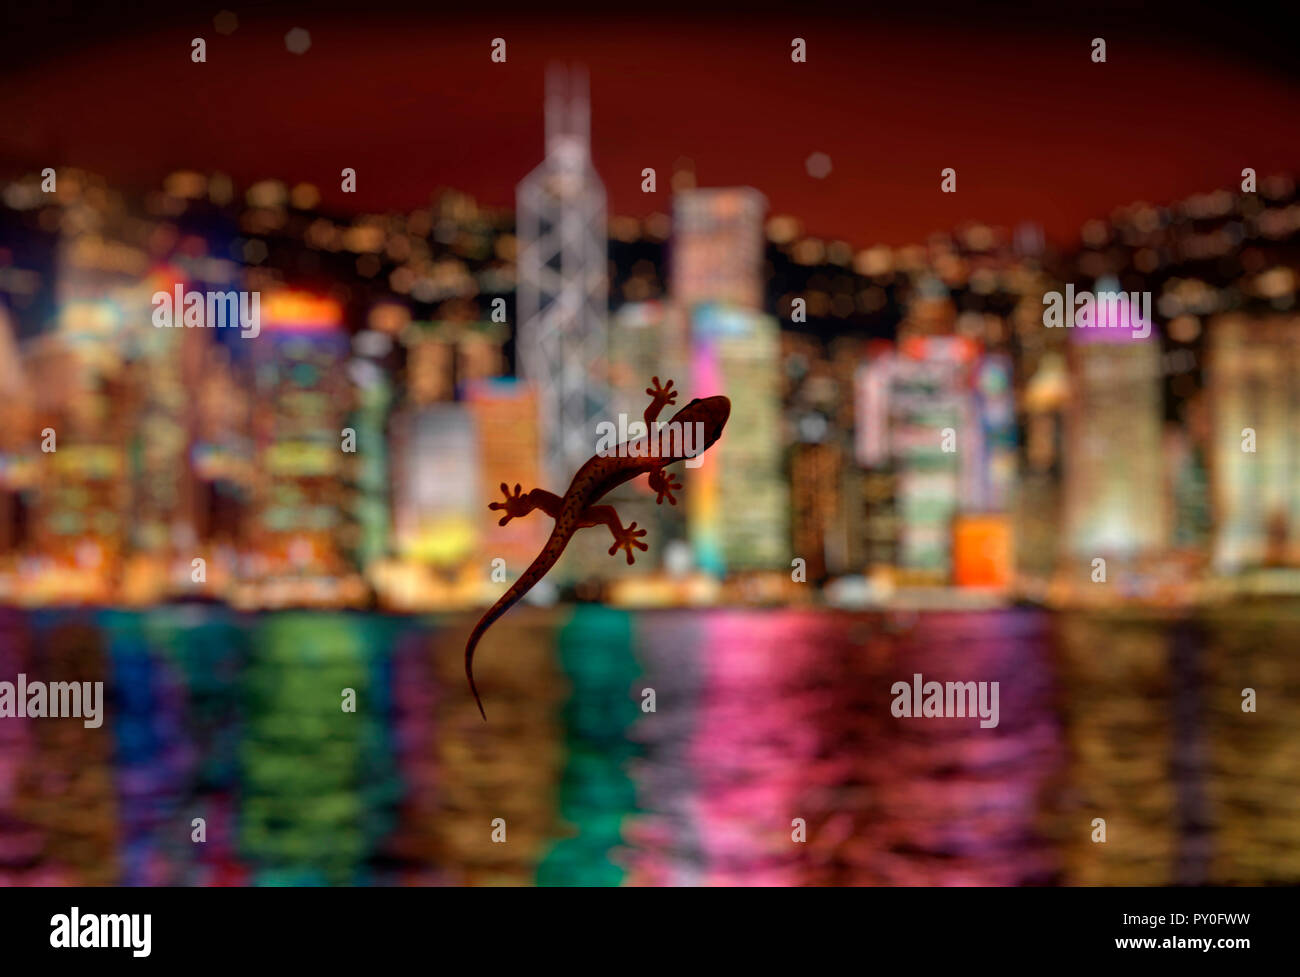 Lizard on hotel room window with blurred modern cityscape backdrop at night, Hong Kong, China Stock Photo